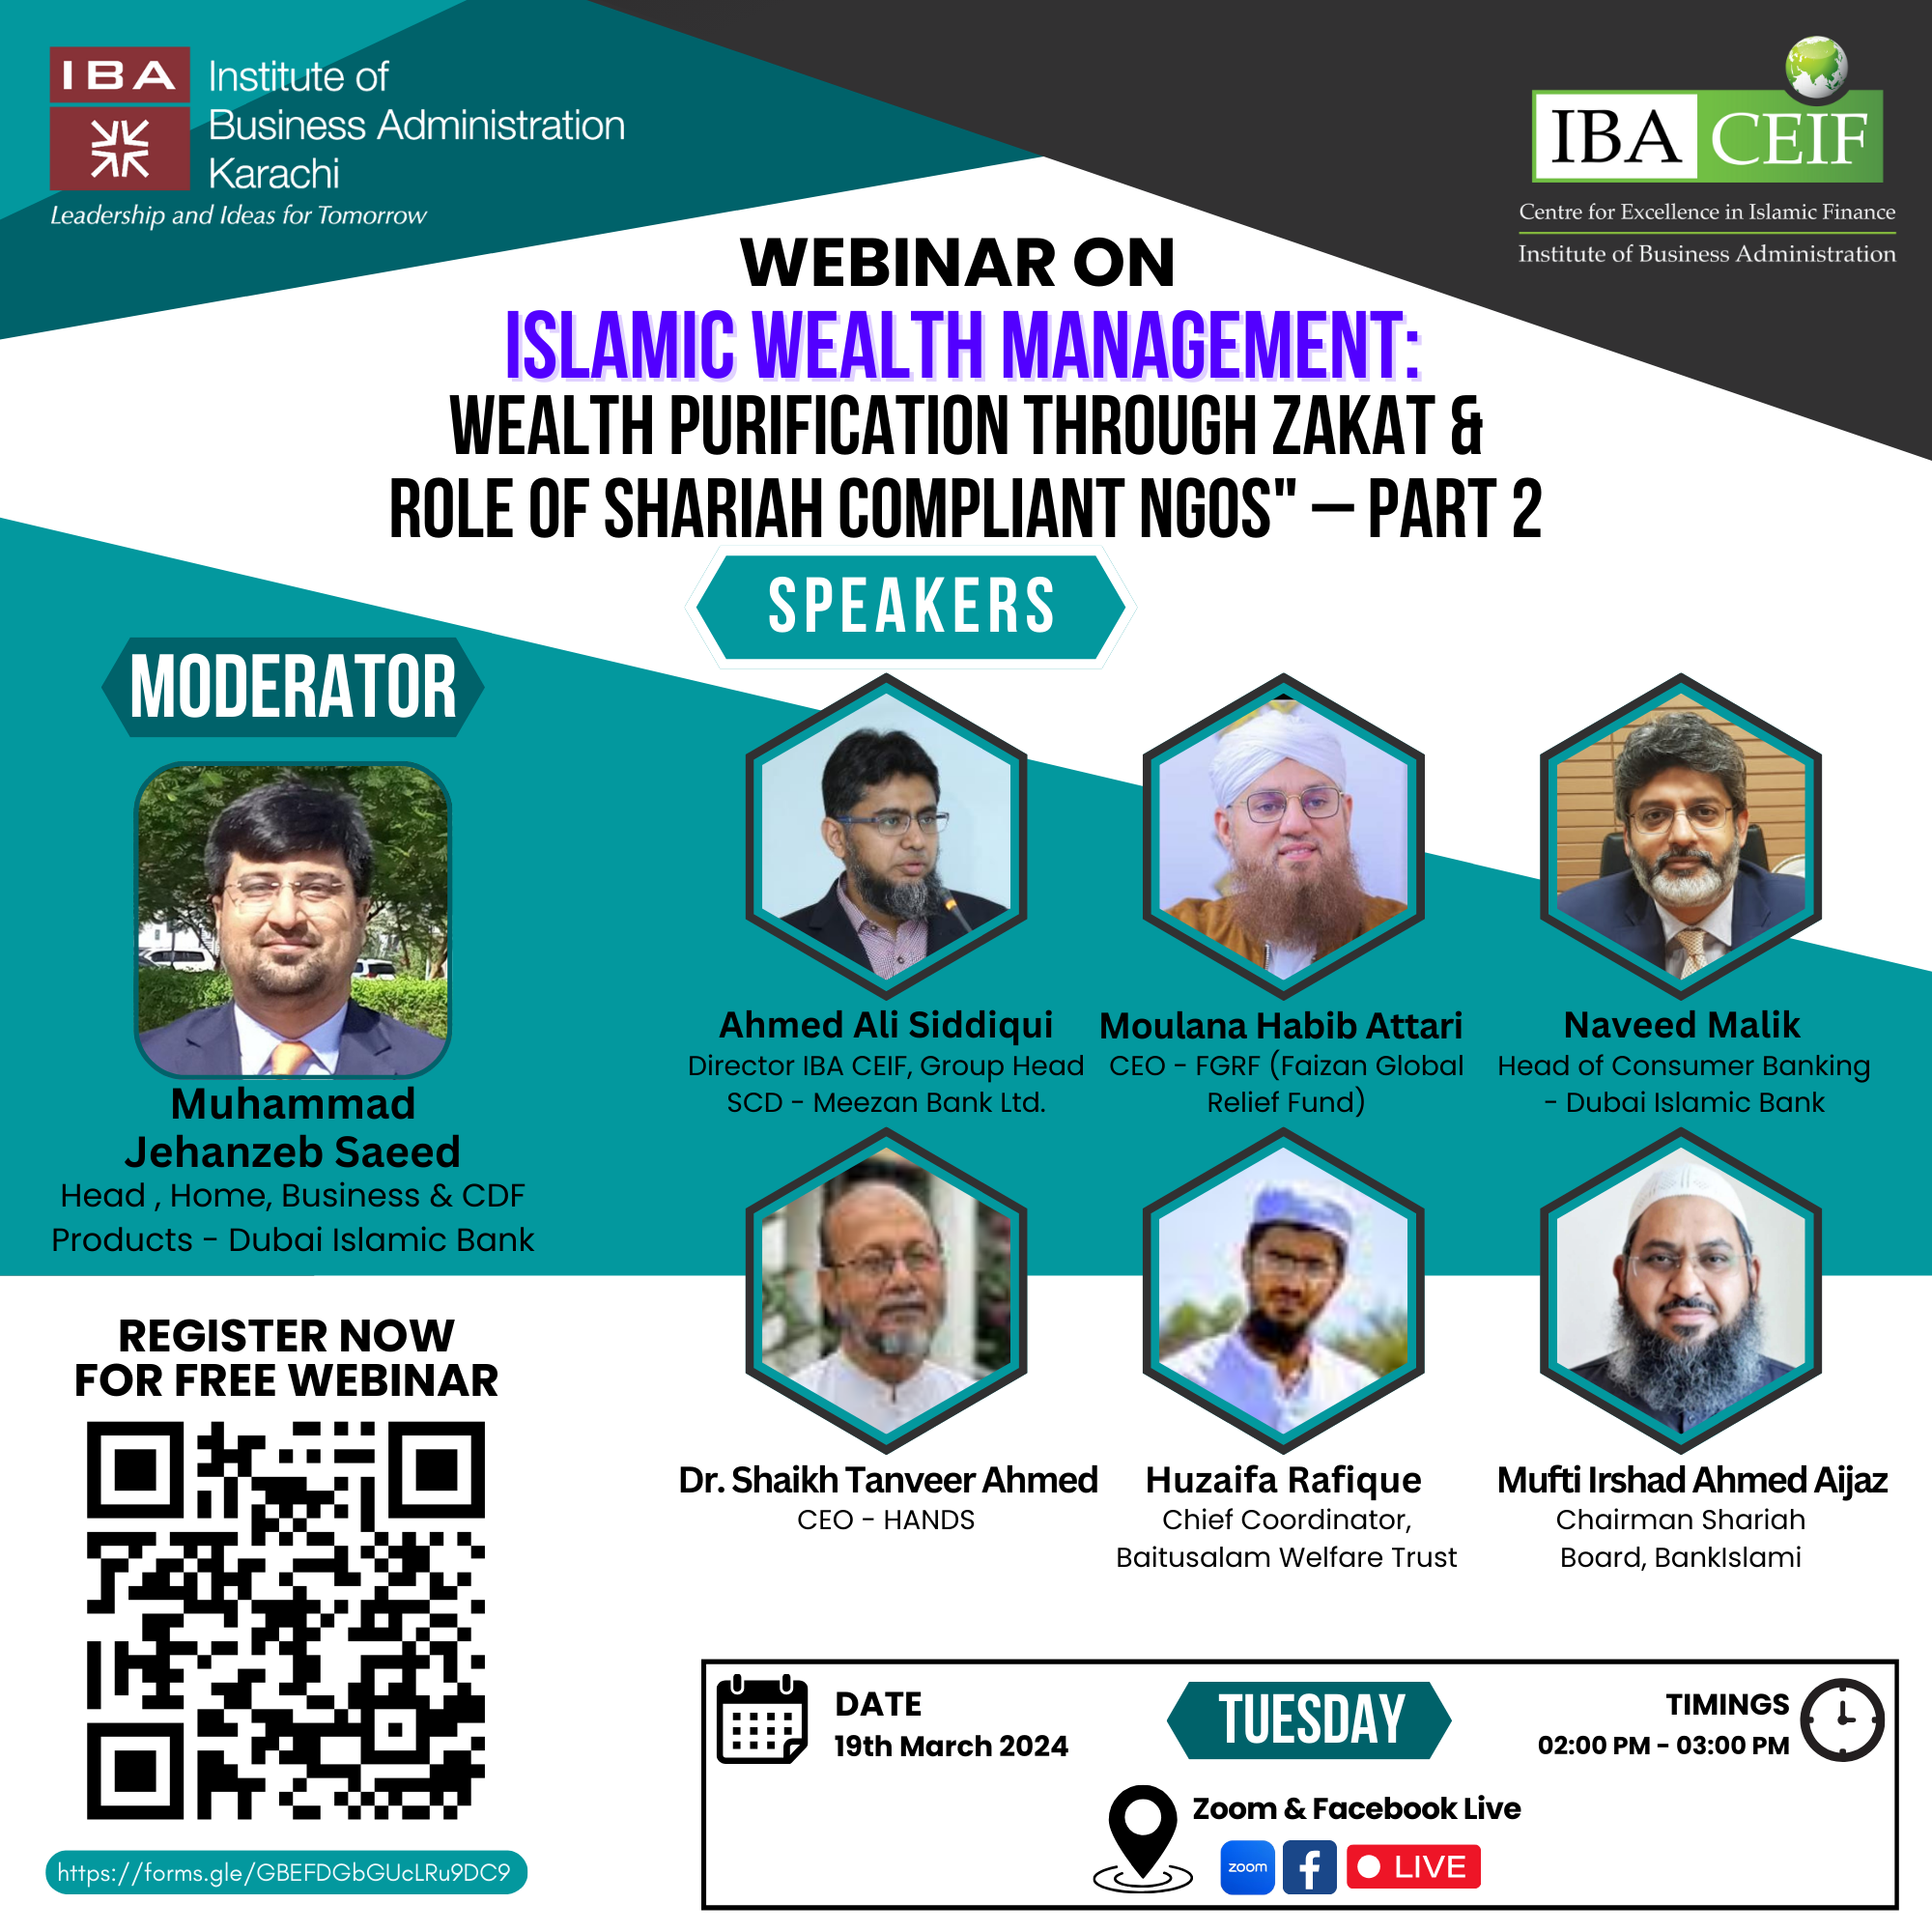 Islamic Wealth Management: Wealth Purification through Zakat & Role of Shariah Compliant NGOs - Part 2